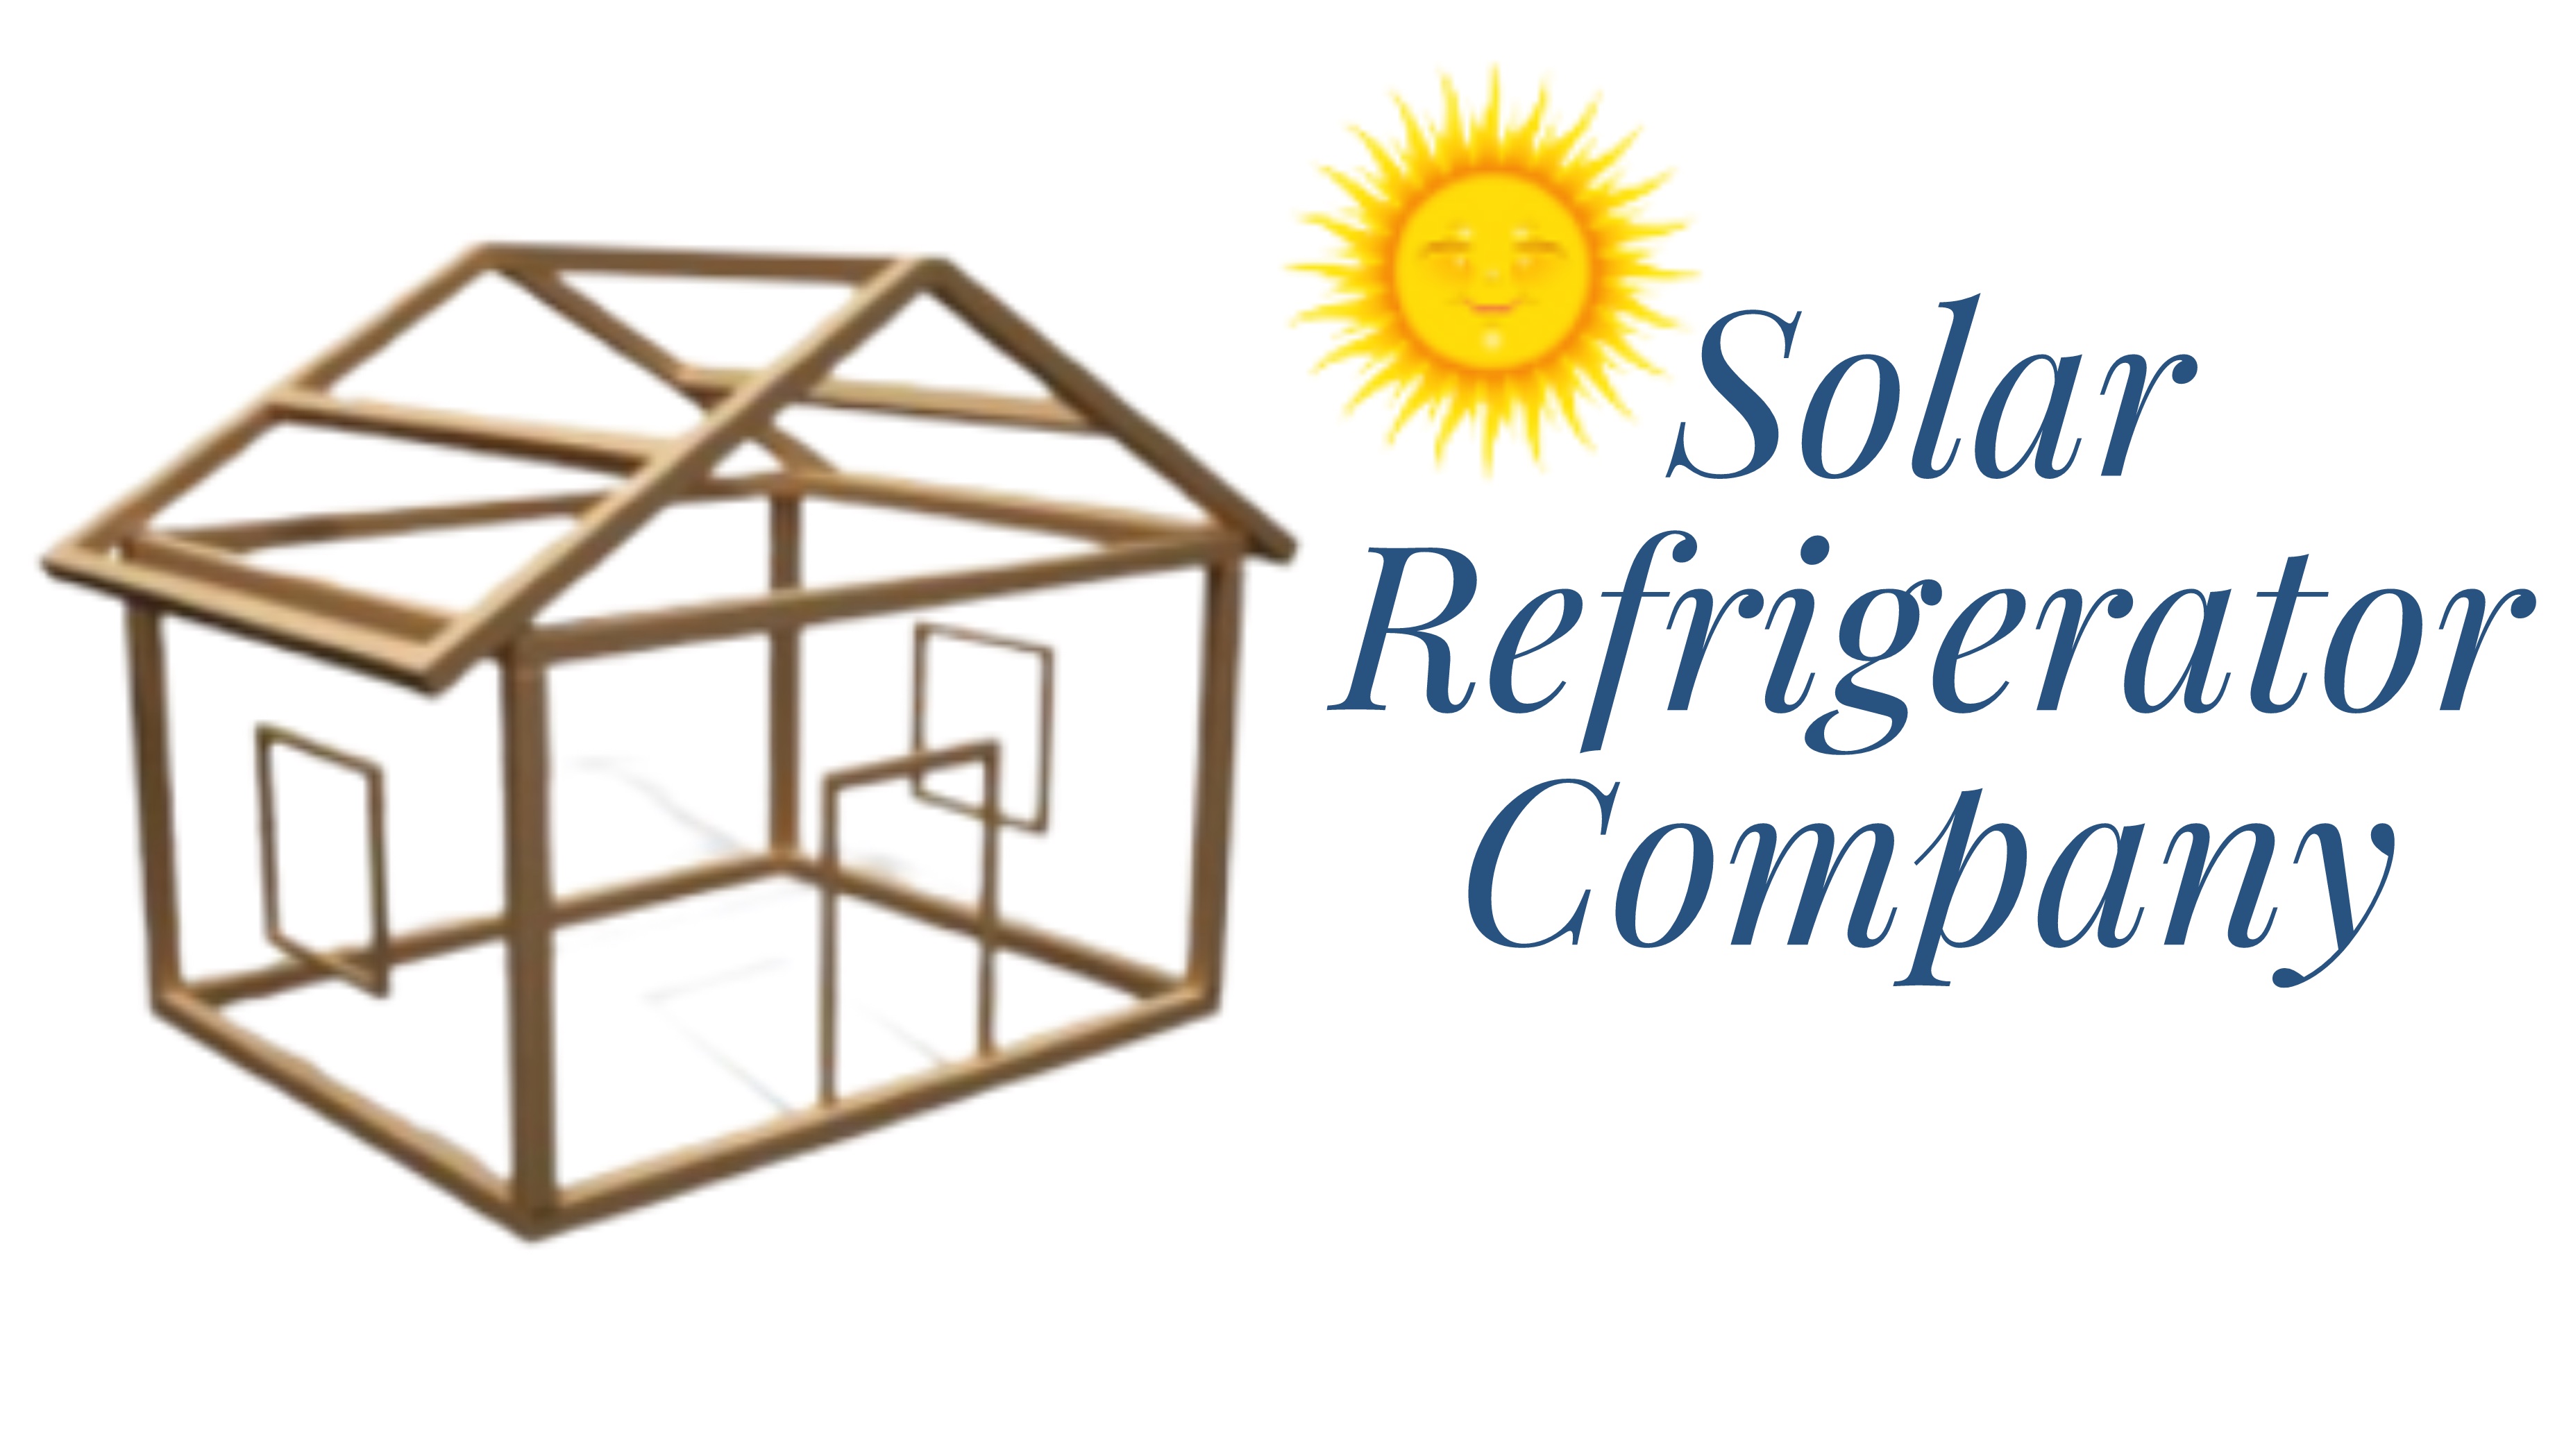 Solar Refrigerator Company Introduces New Brands & Products Including the New Domestic 10 cu ft RV Refrigerator